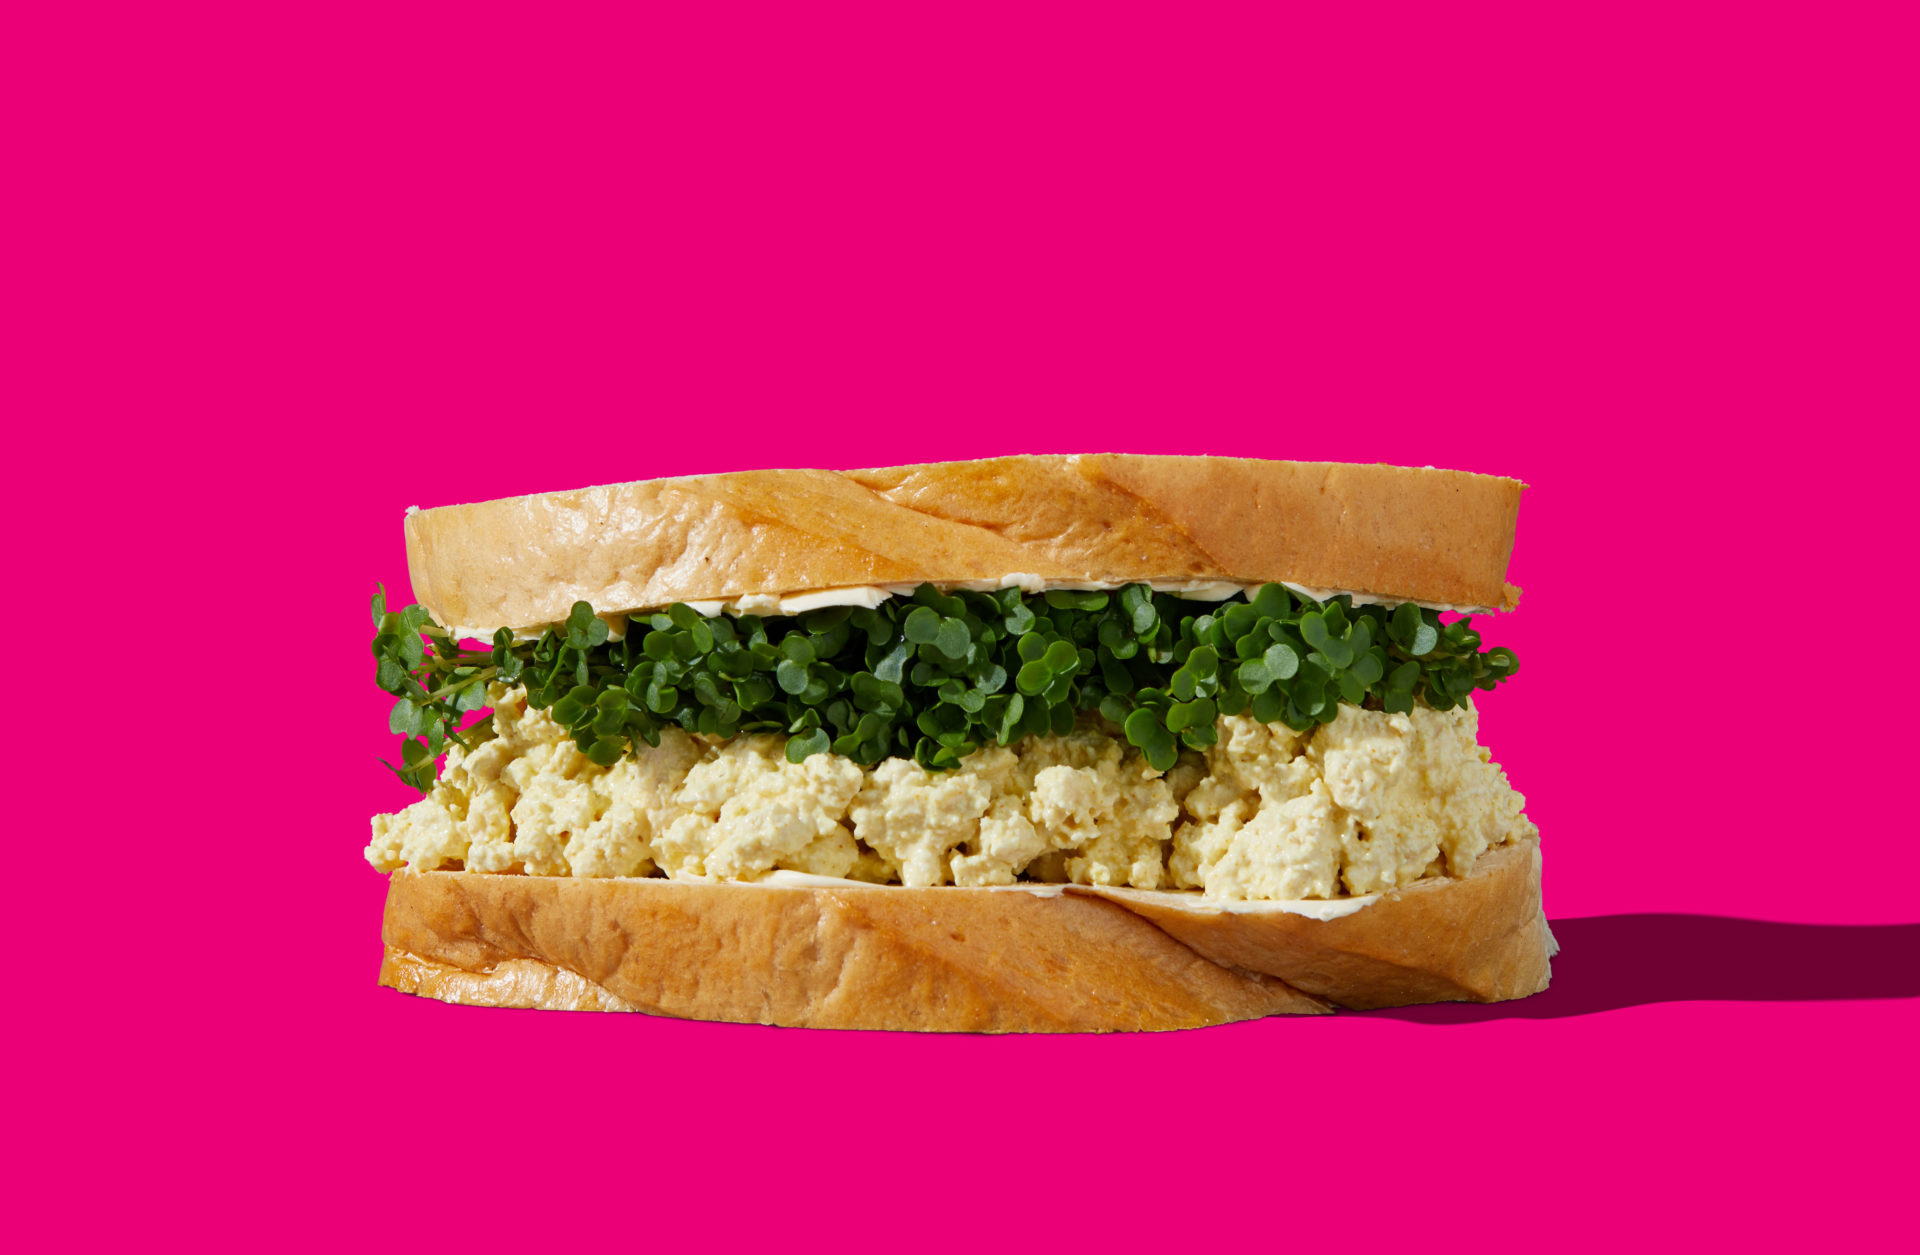 Tofoo Egg and Cress Sandwich